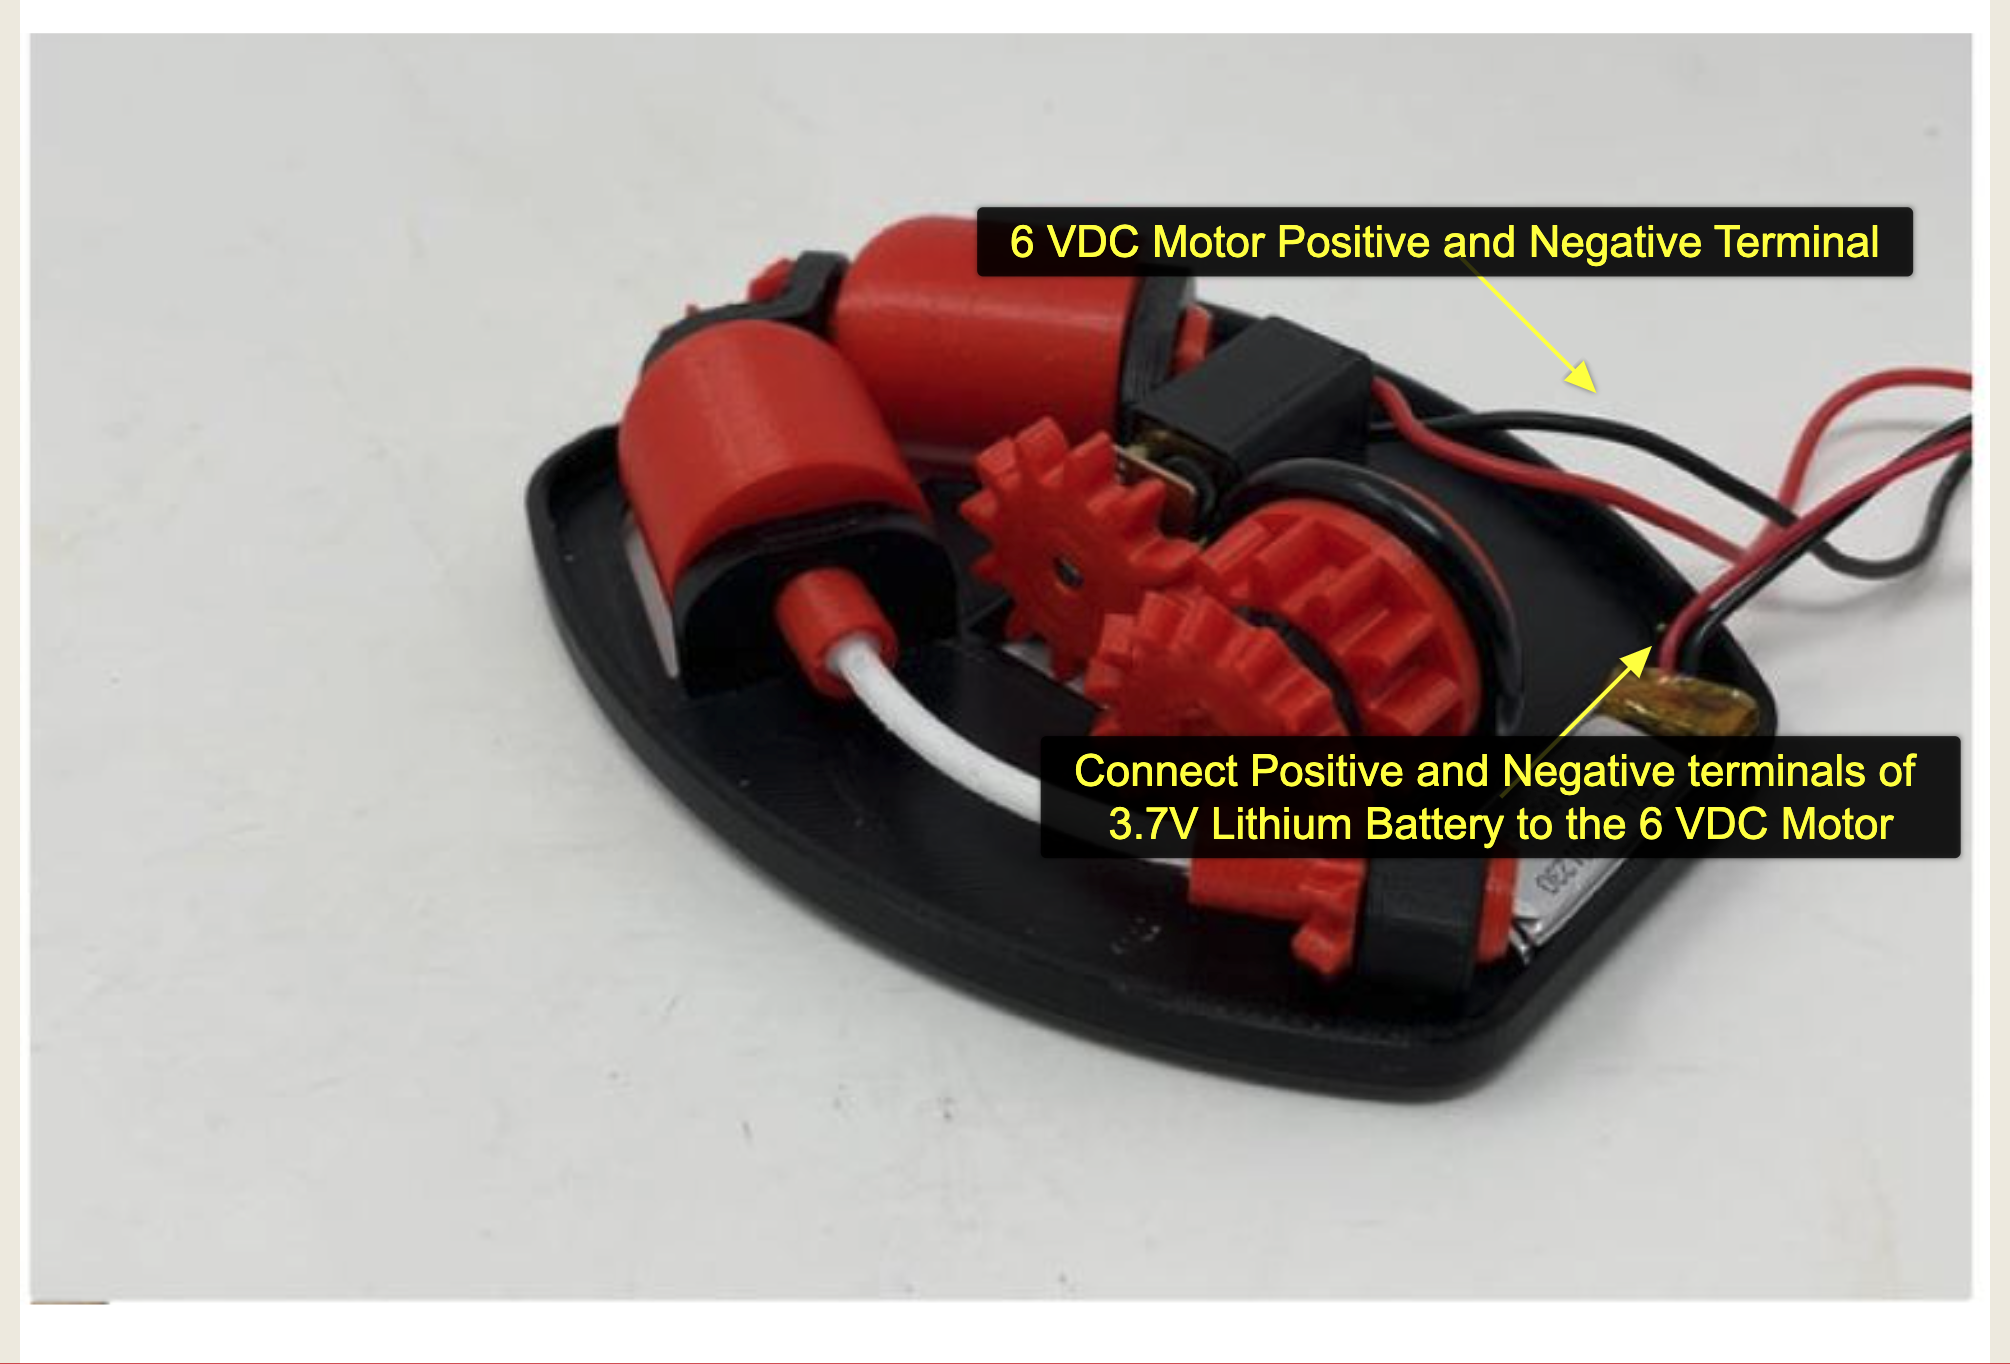 6 VDC motor positive and negative terminal